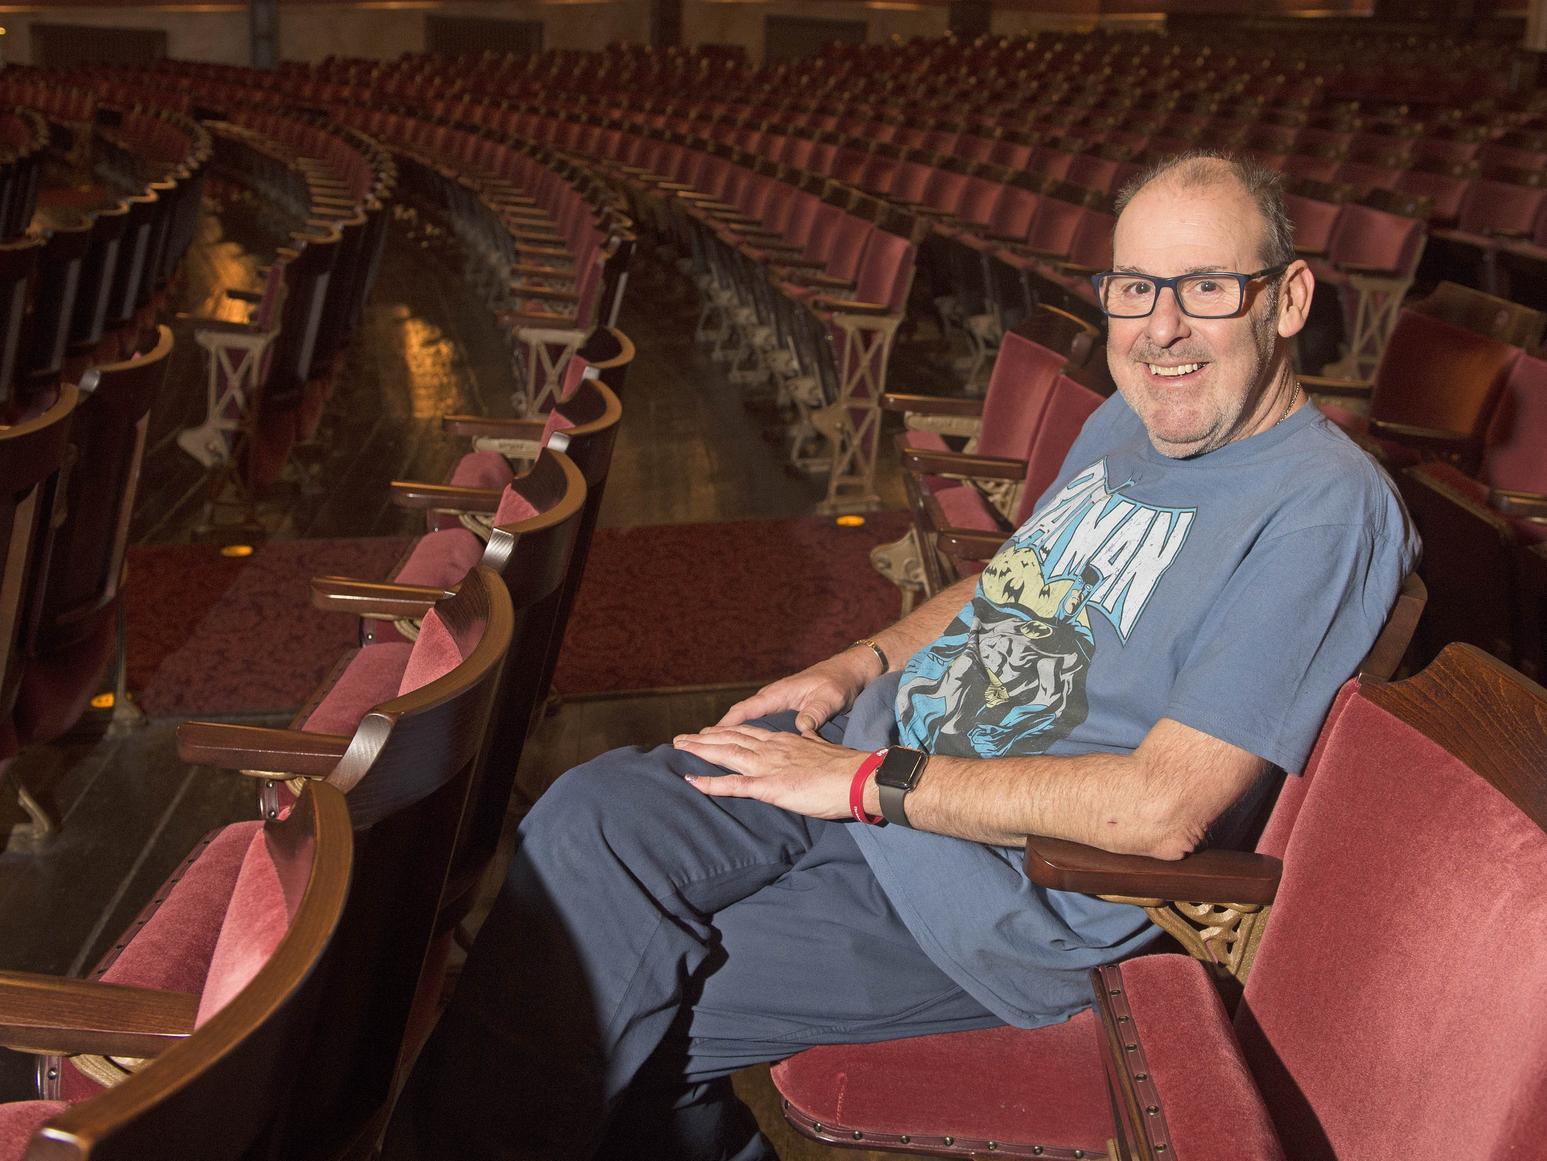 It has been quite a year for Edinburgh panto legend Andy Gray, who has returned to the stage after receiving life-saving treatment for blood cancer.